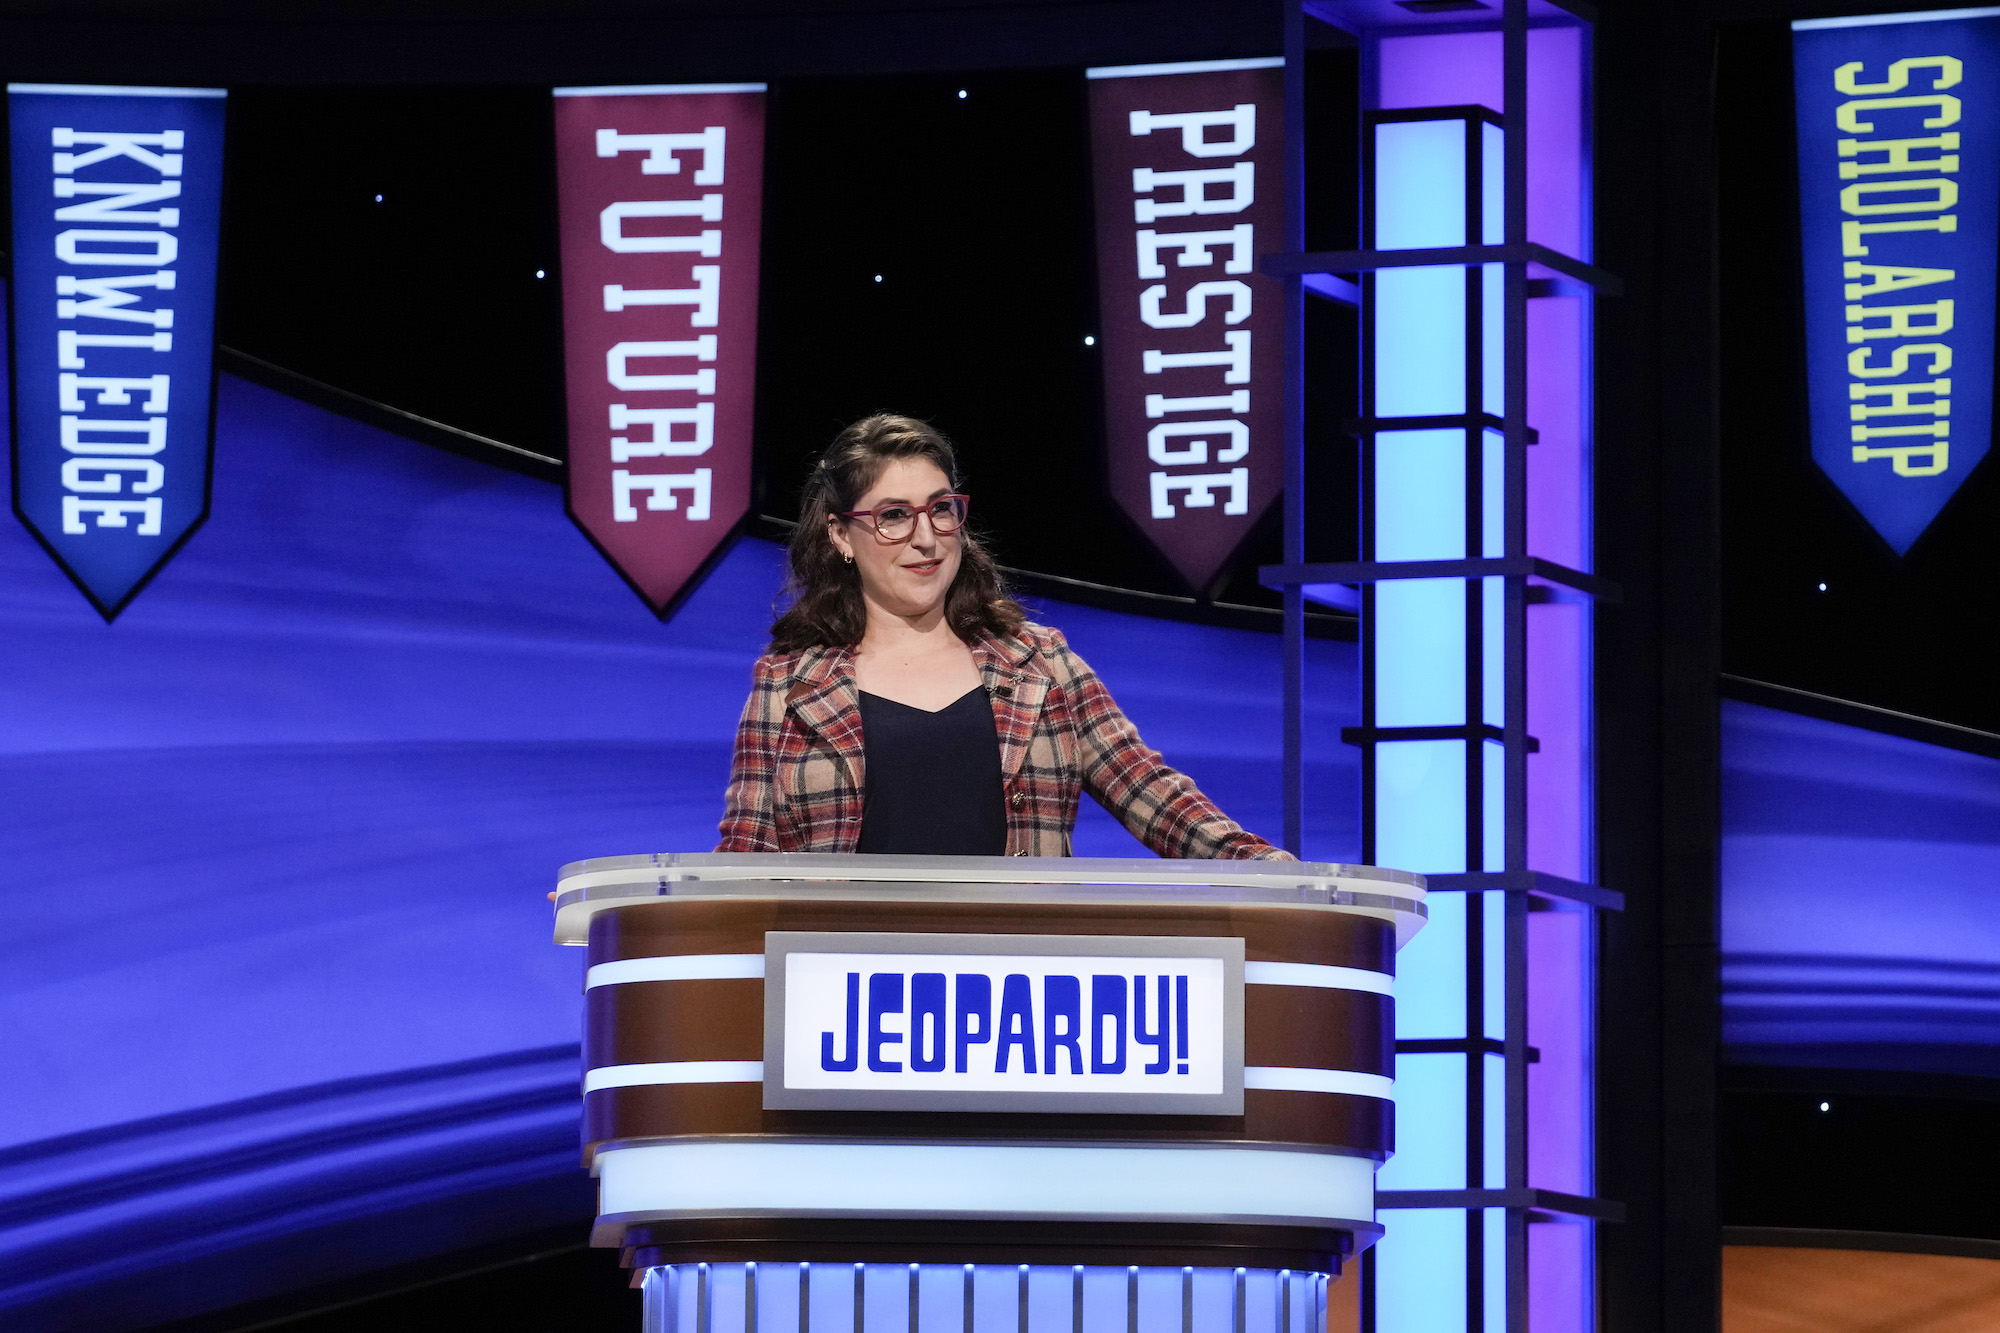 'Jeopardy!' host Mayim Bilaik stands at the podium reading questions